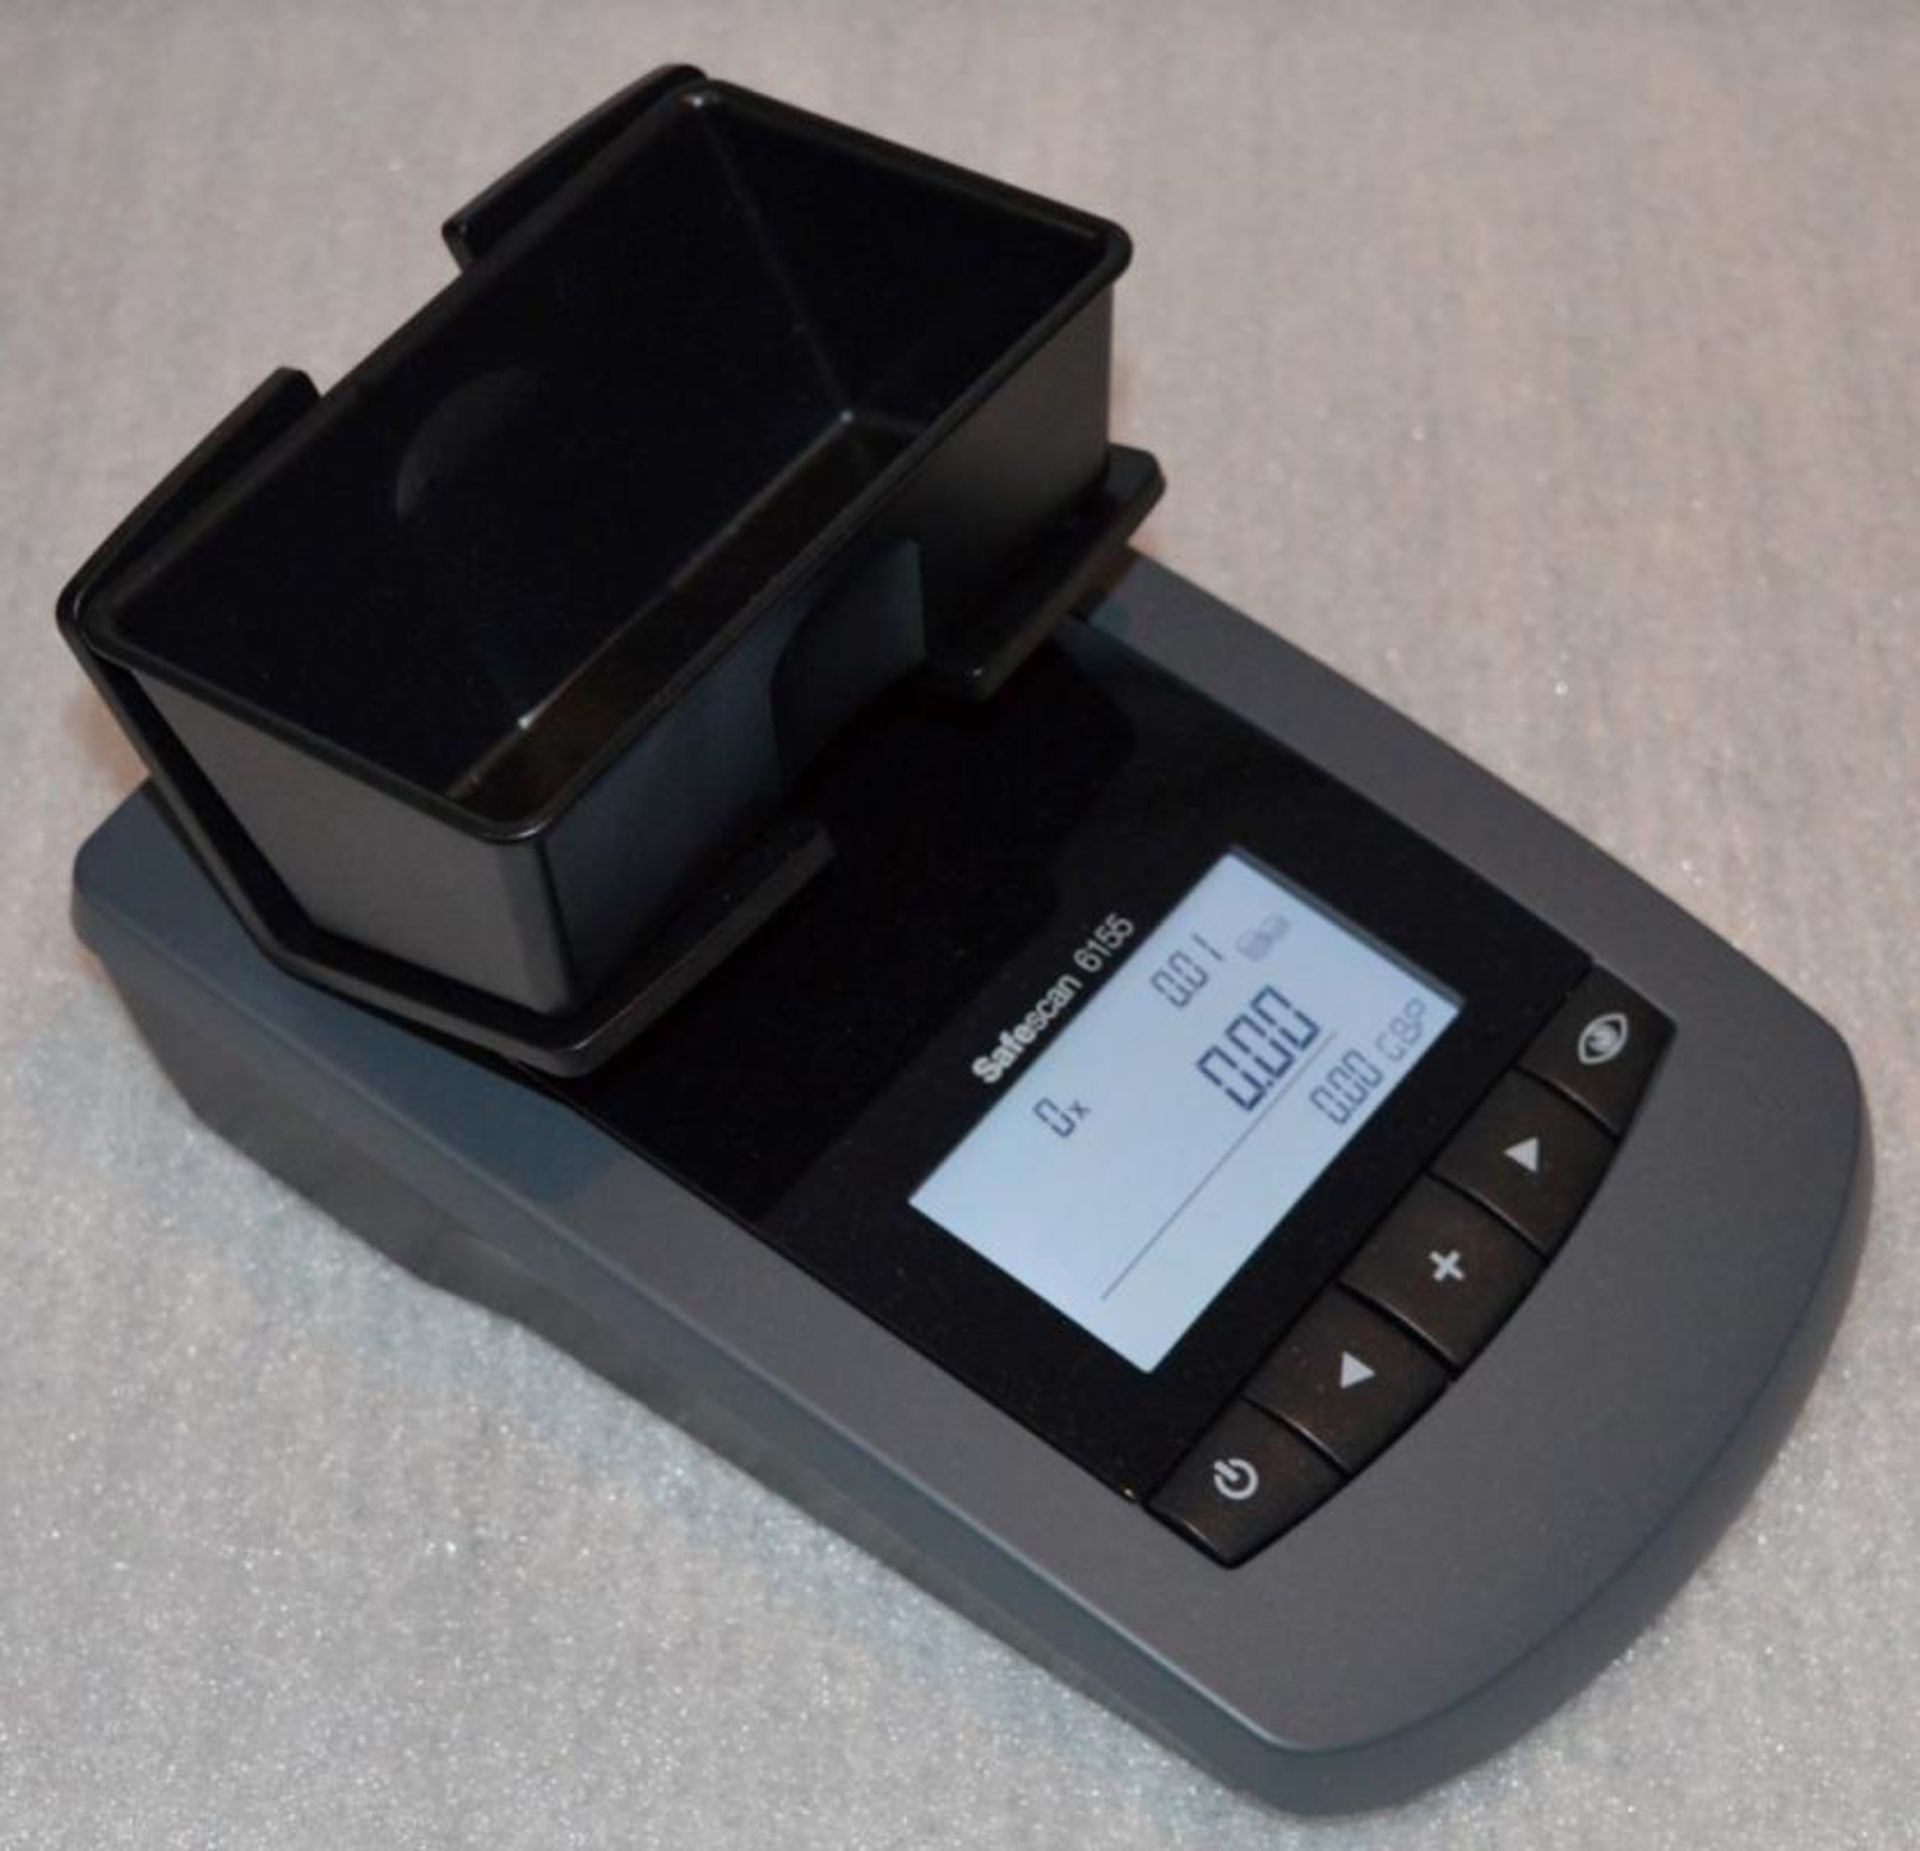 1 x SafeScan 6155 Coin and Bank Note Counter - Includes Coin and Note Trays, Box, Instructions and B - Image 5 of 10